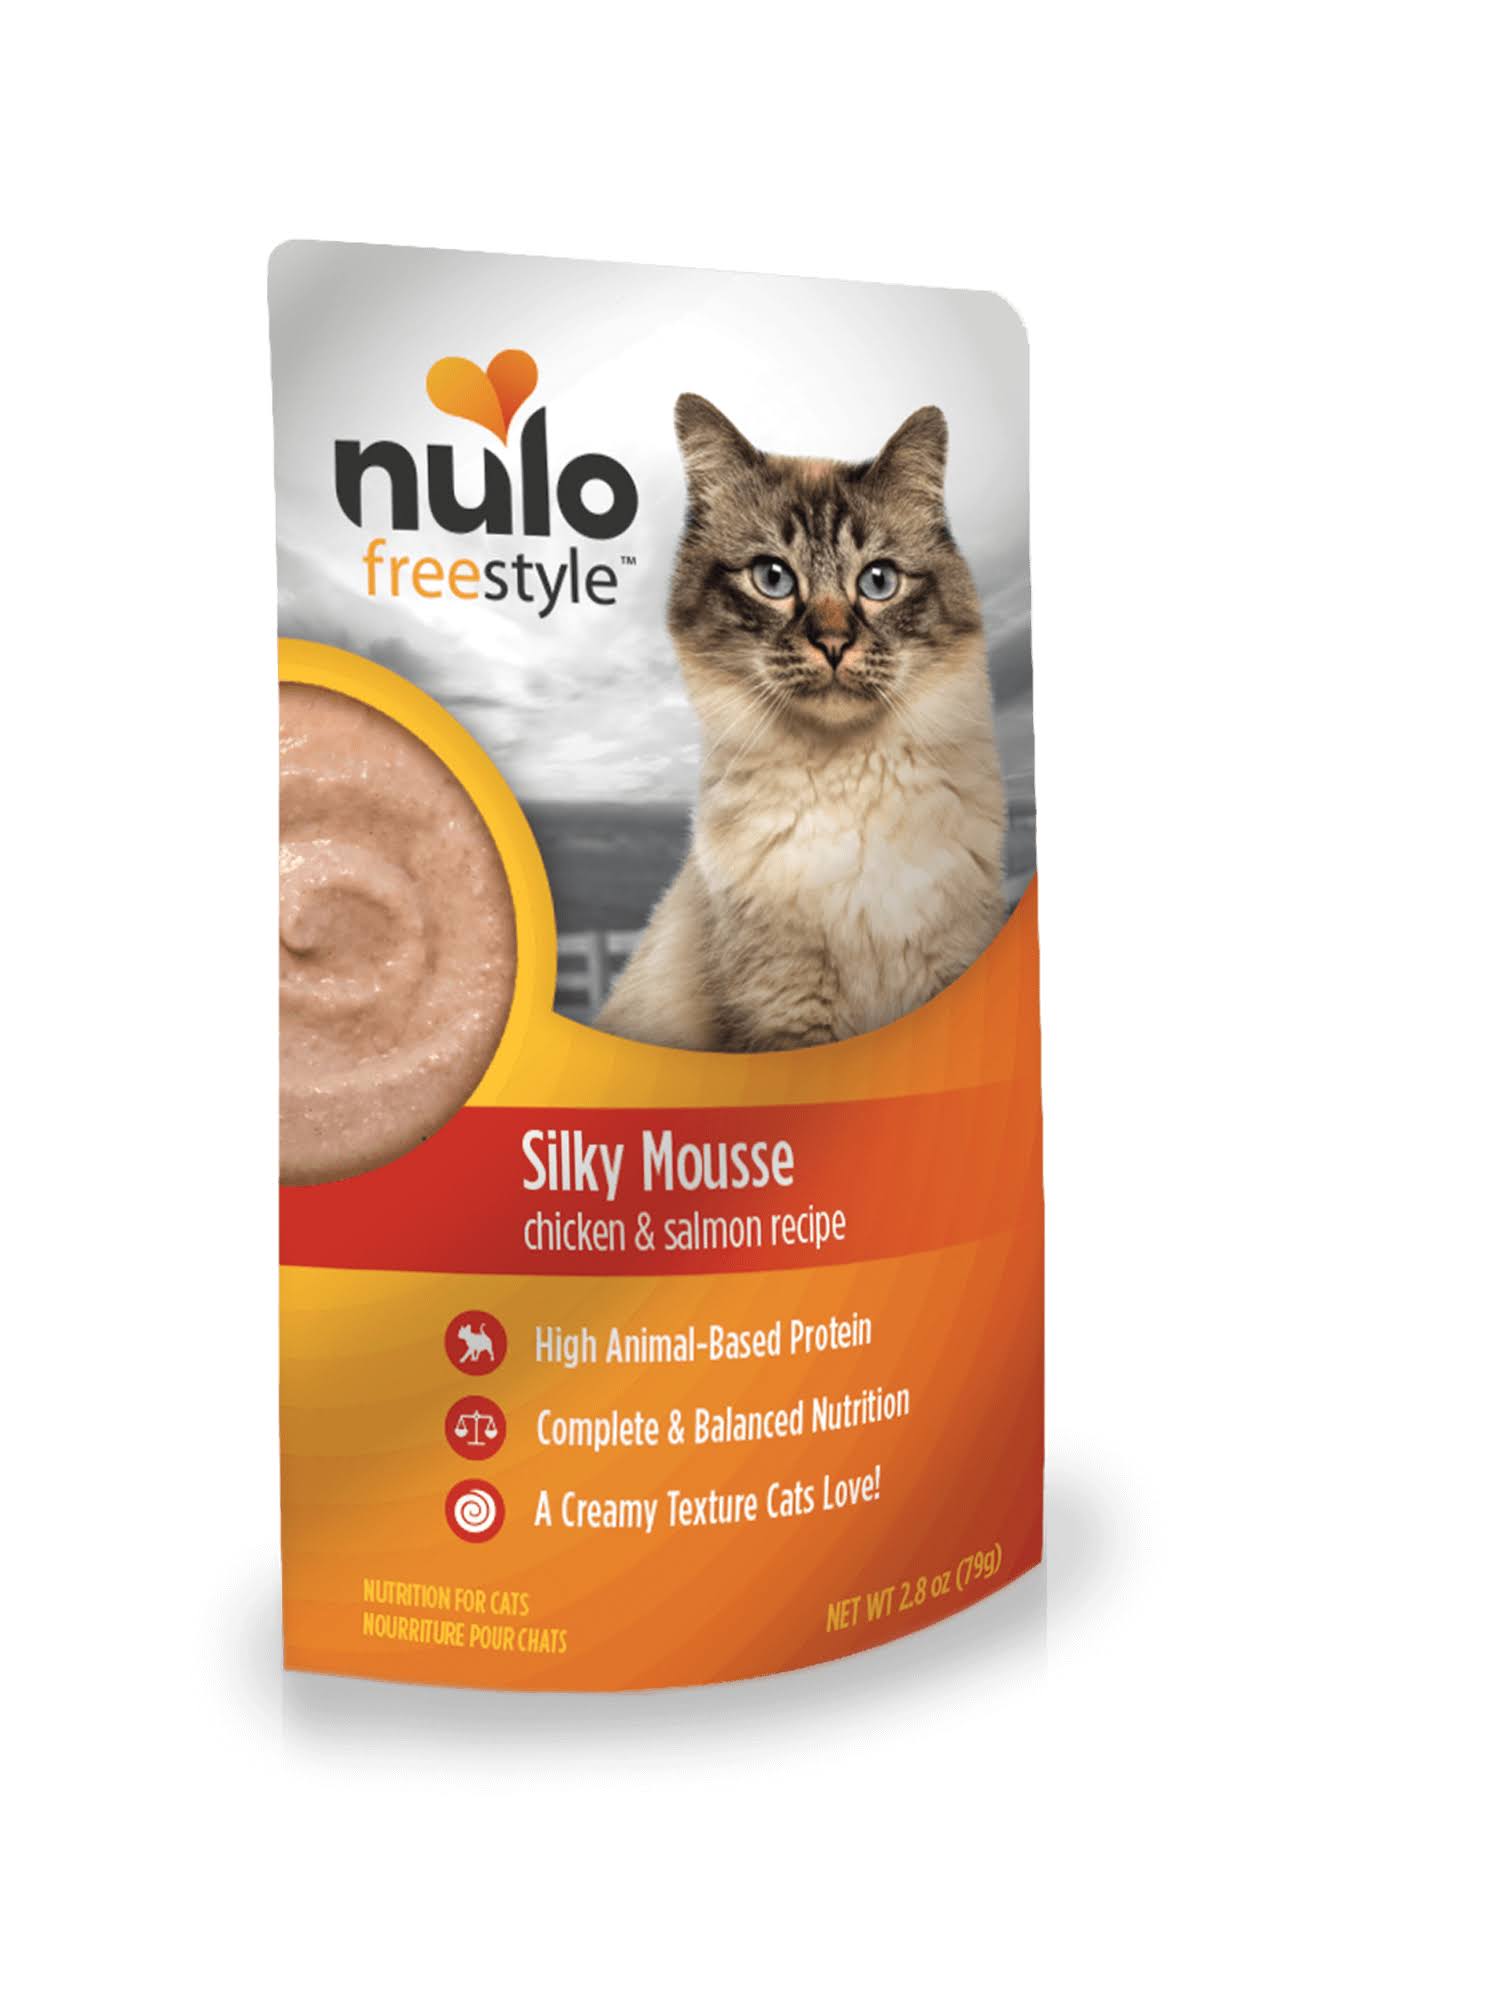 Nulo Freestyle Cat Silky Mousse, Chicken & Salmon, 2.8-oz Pouch